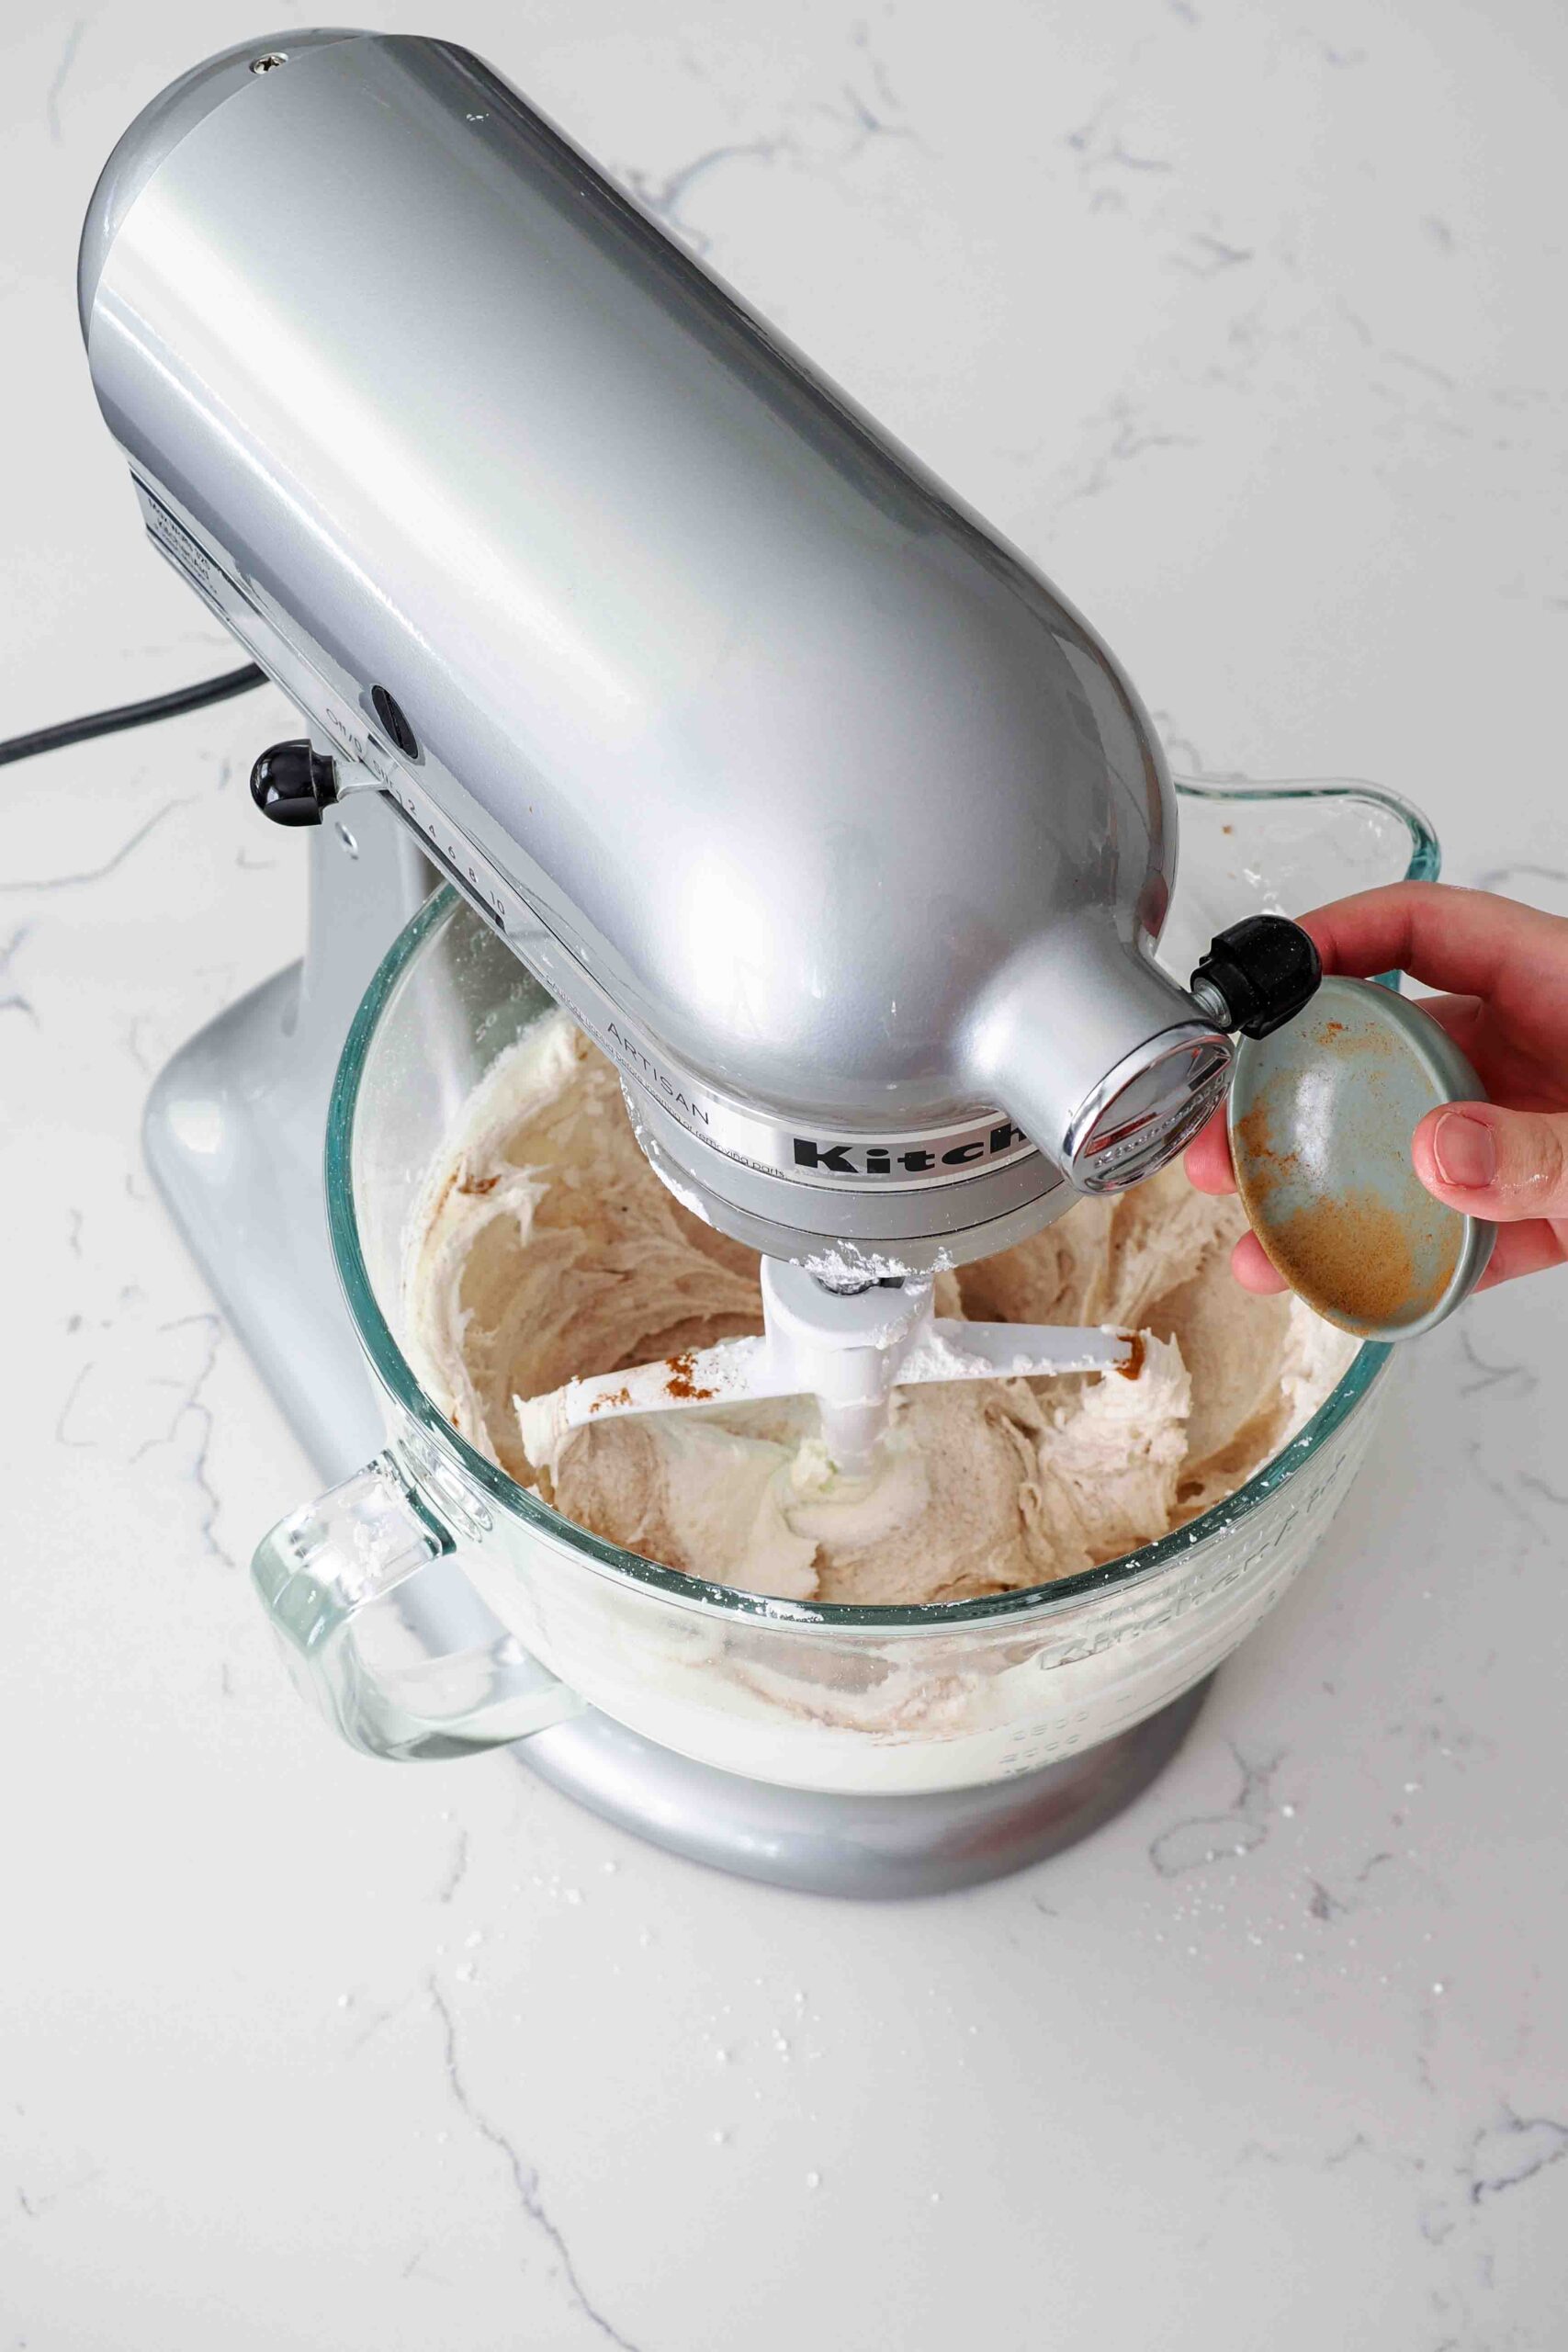 A hand adds ground cinnamon to buttercream in a stand mixer bowl.